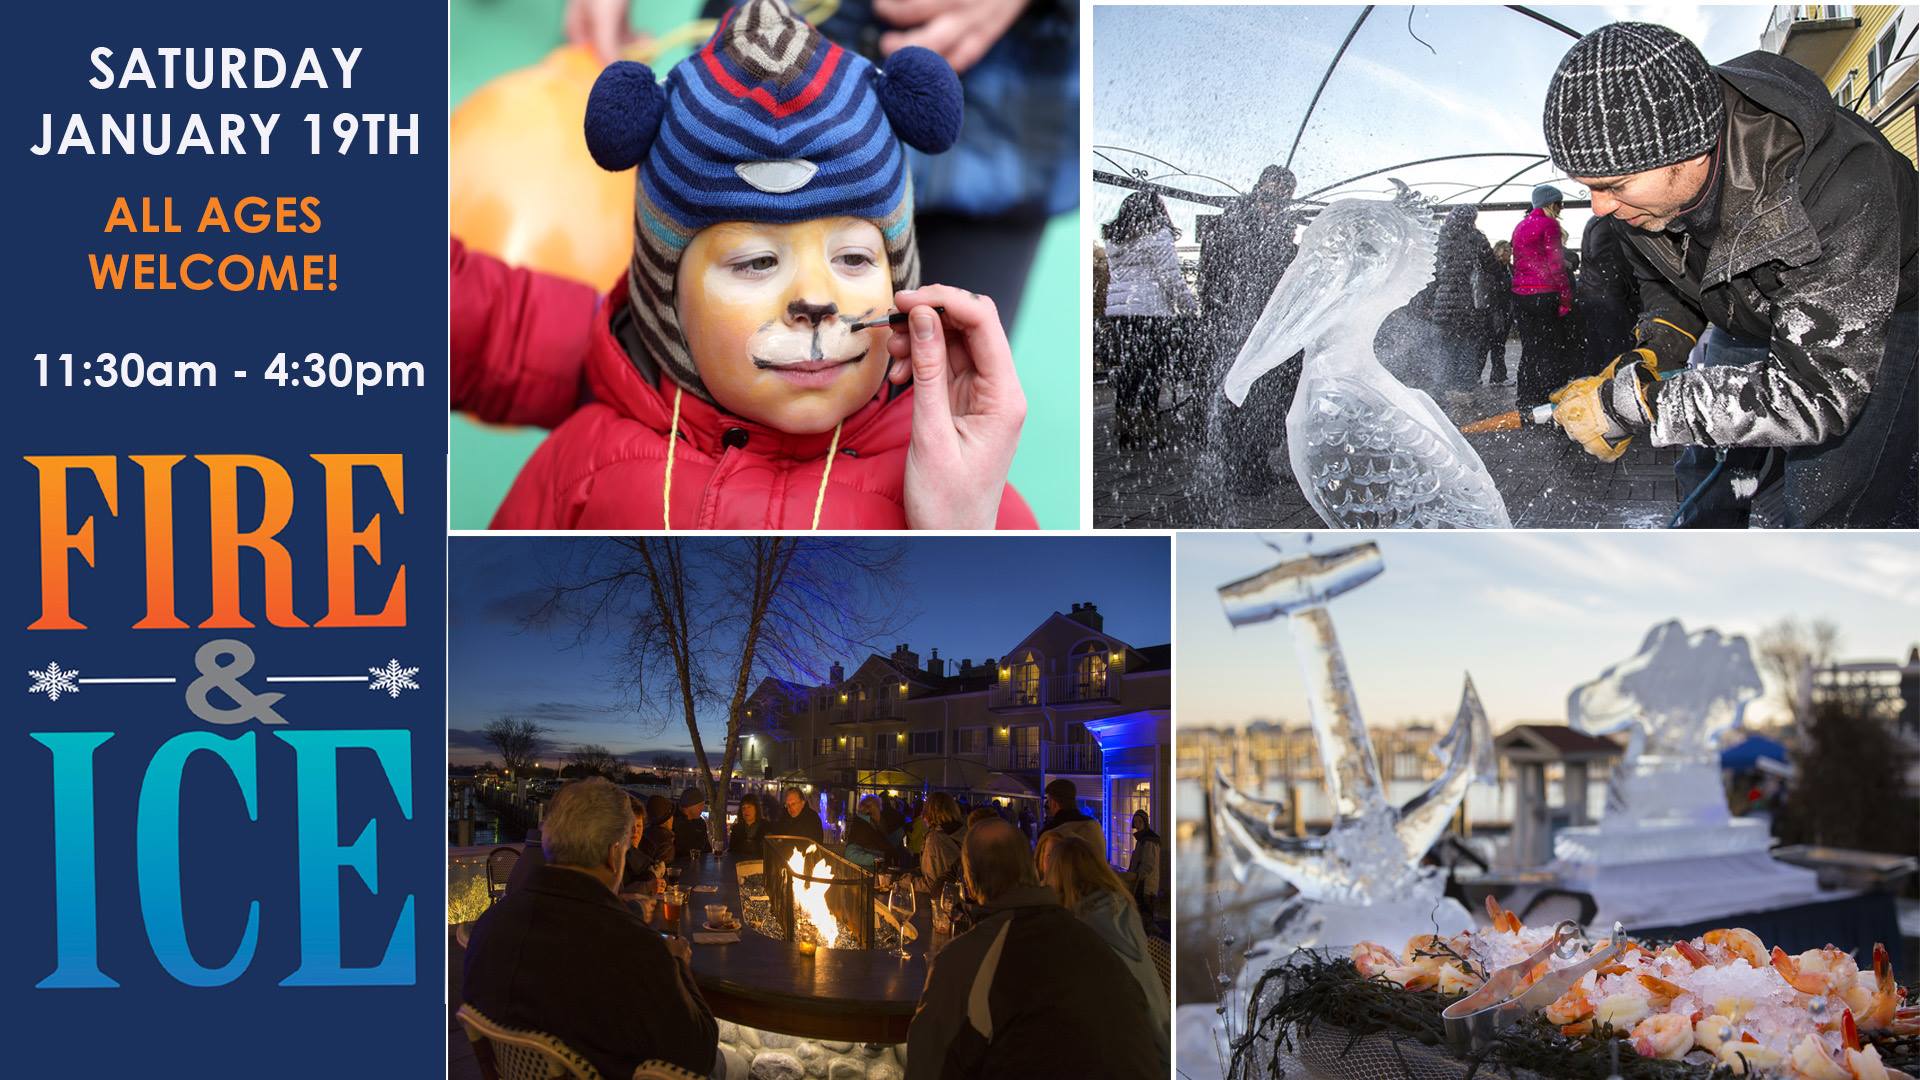 2019 Saybrook Point Inn Fire and Ice Festival (Free Family Event)